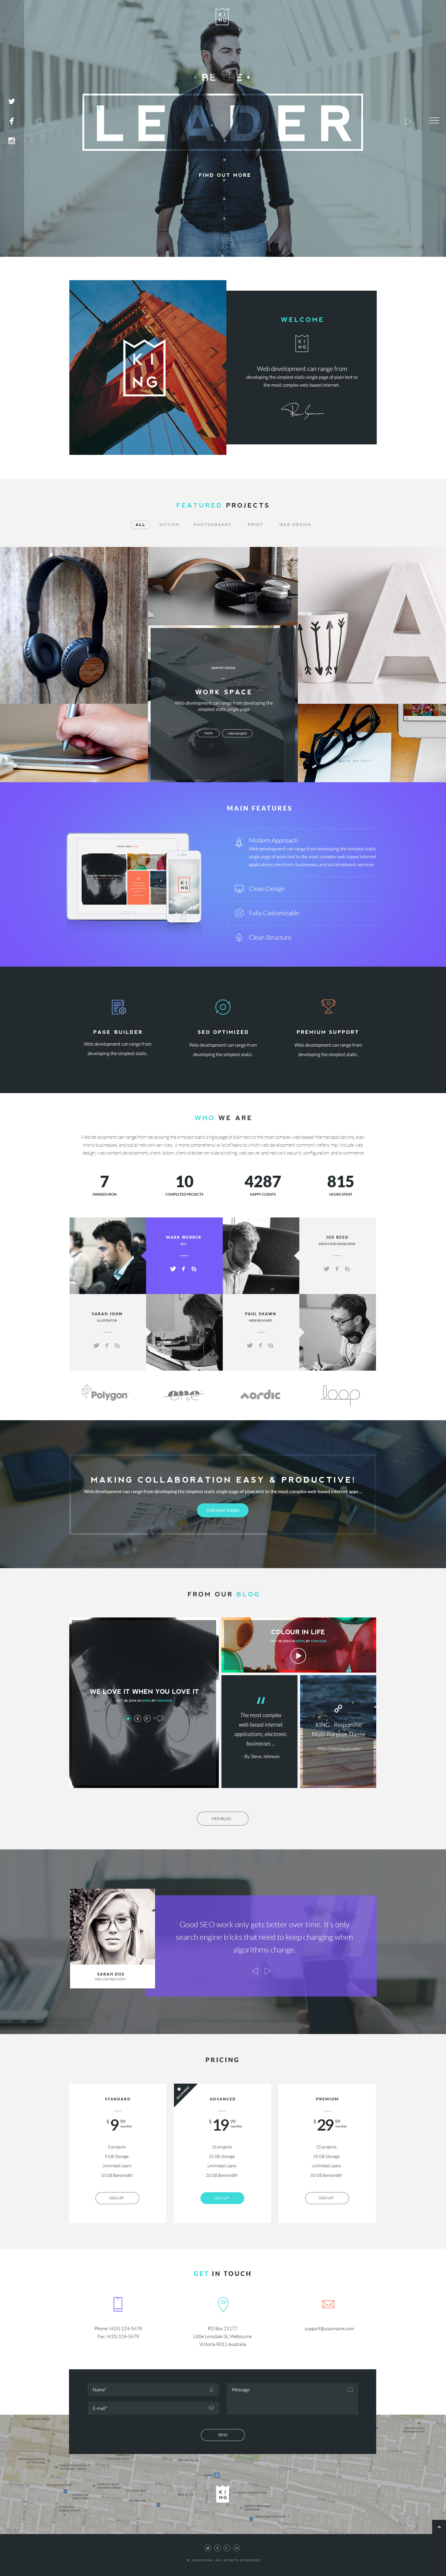 KING - Creative One Page PSD Template